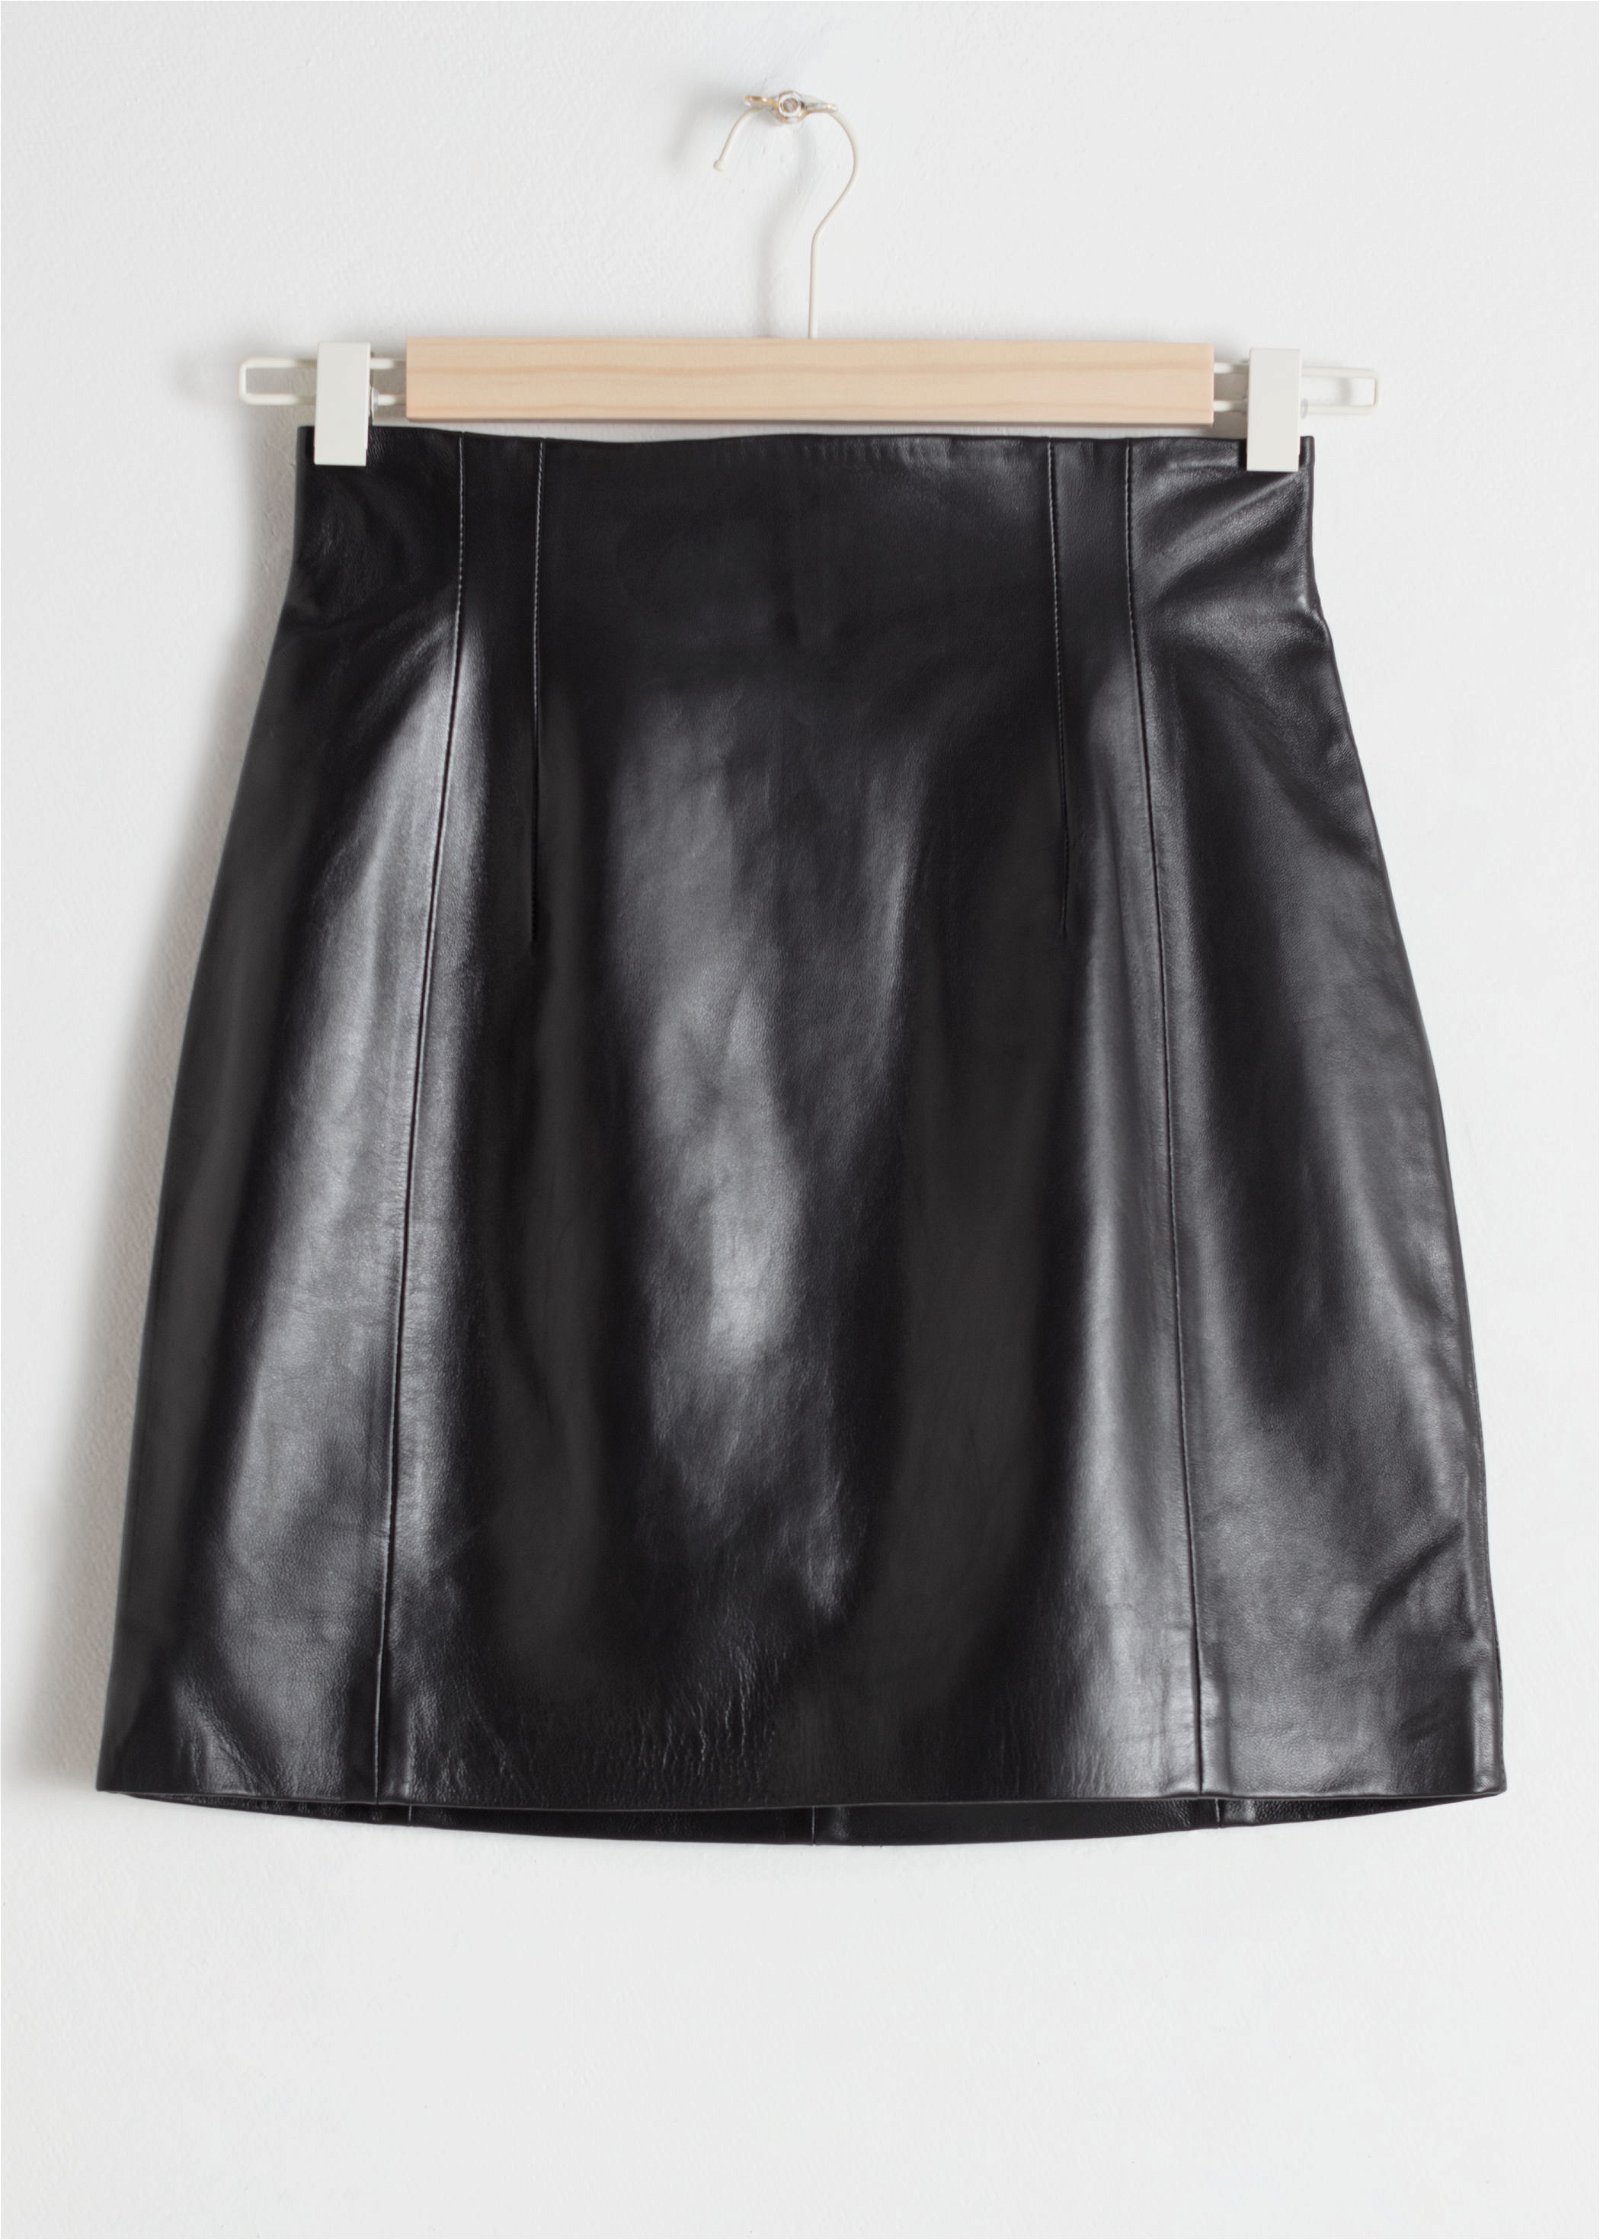 & OTHER STORIES High Waisted Leather Skirt in Black | Endource